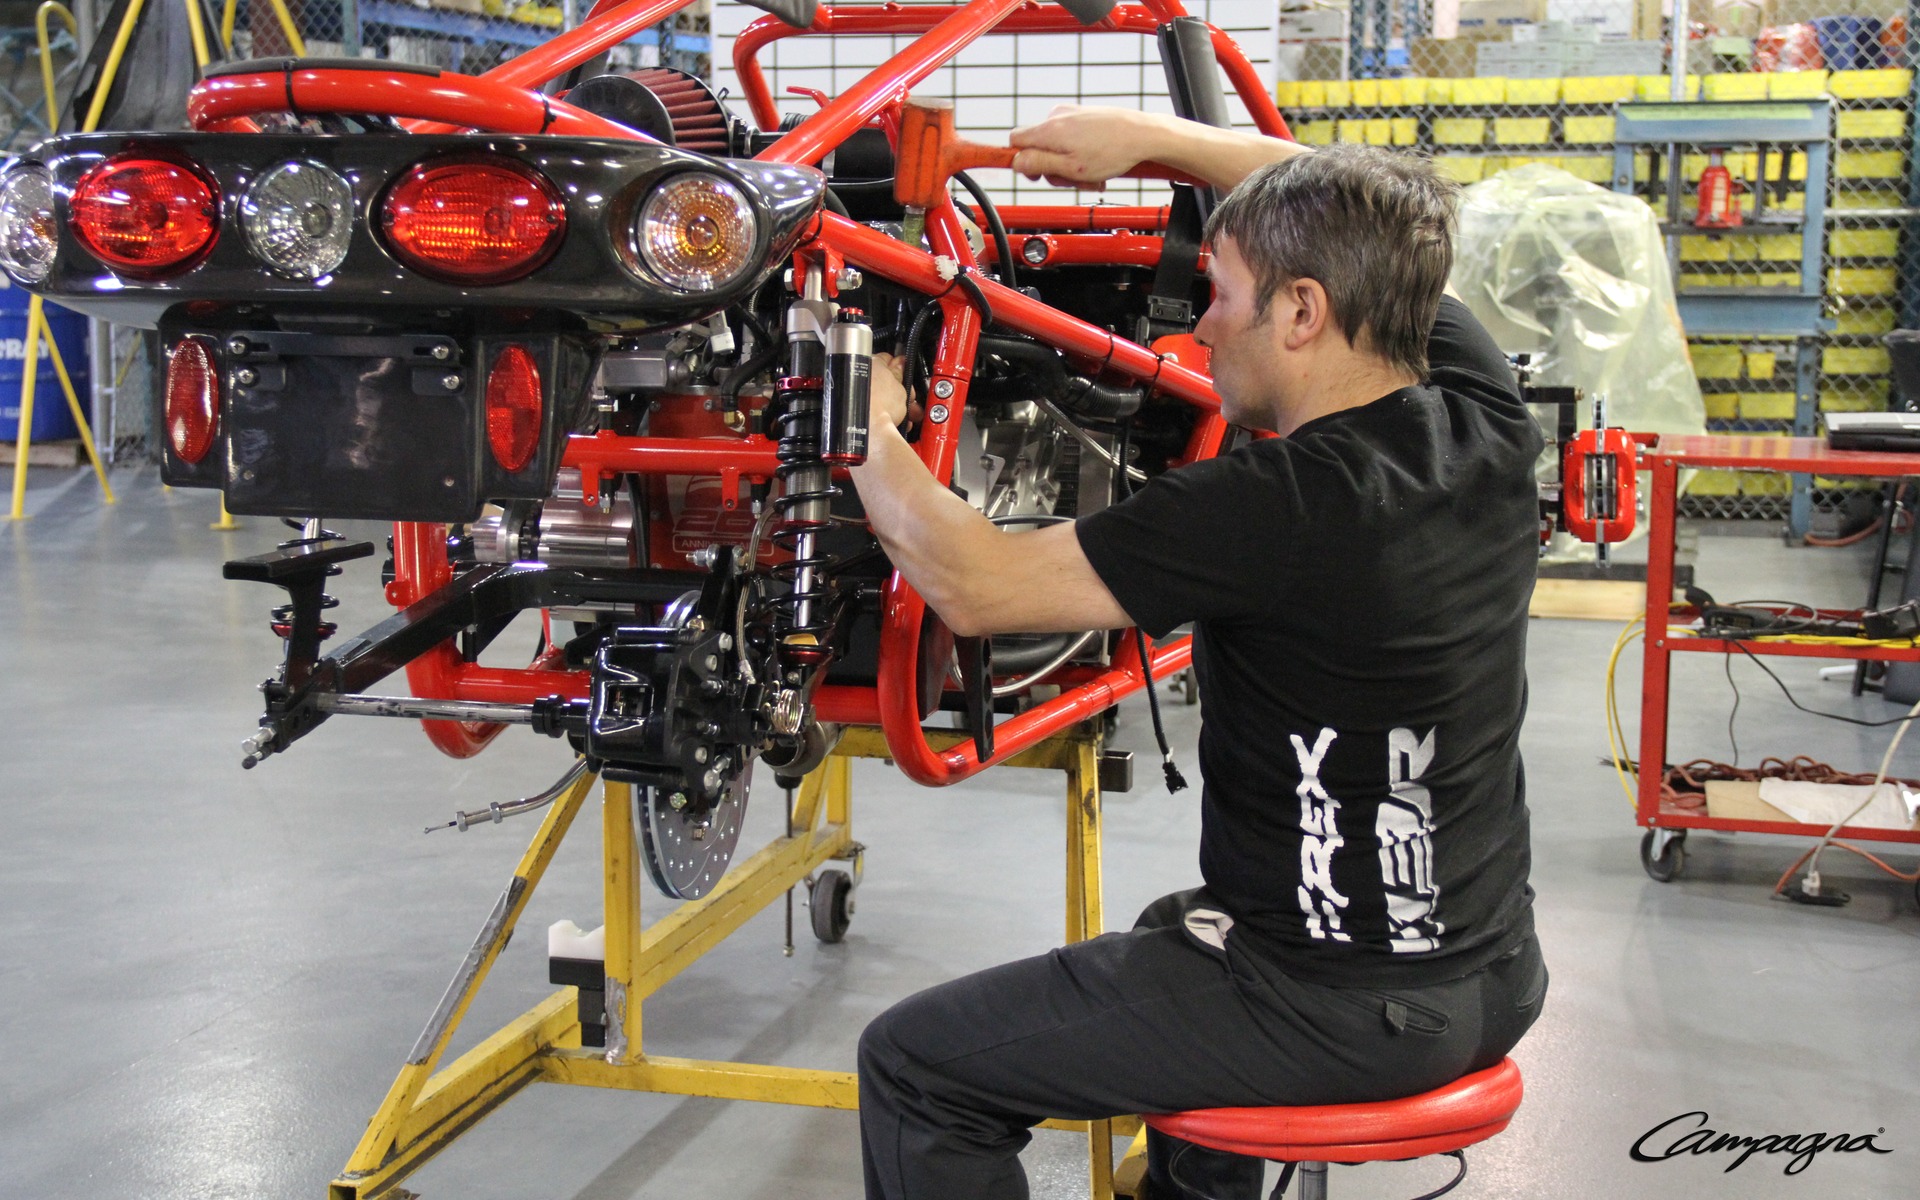 Here’s a craftsman assembling the 20th Anniversary T-Rex 16S P.